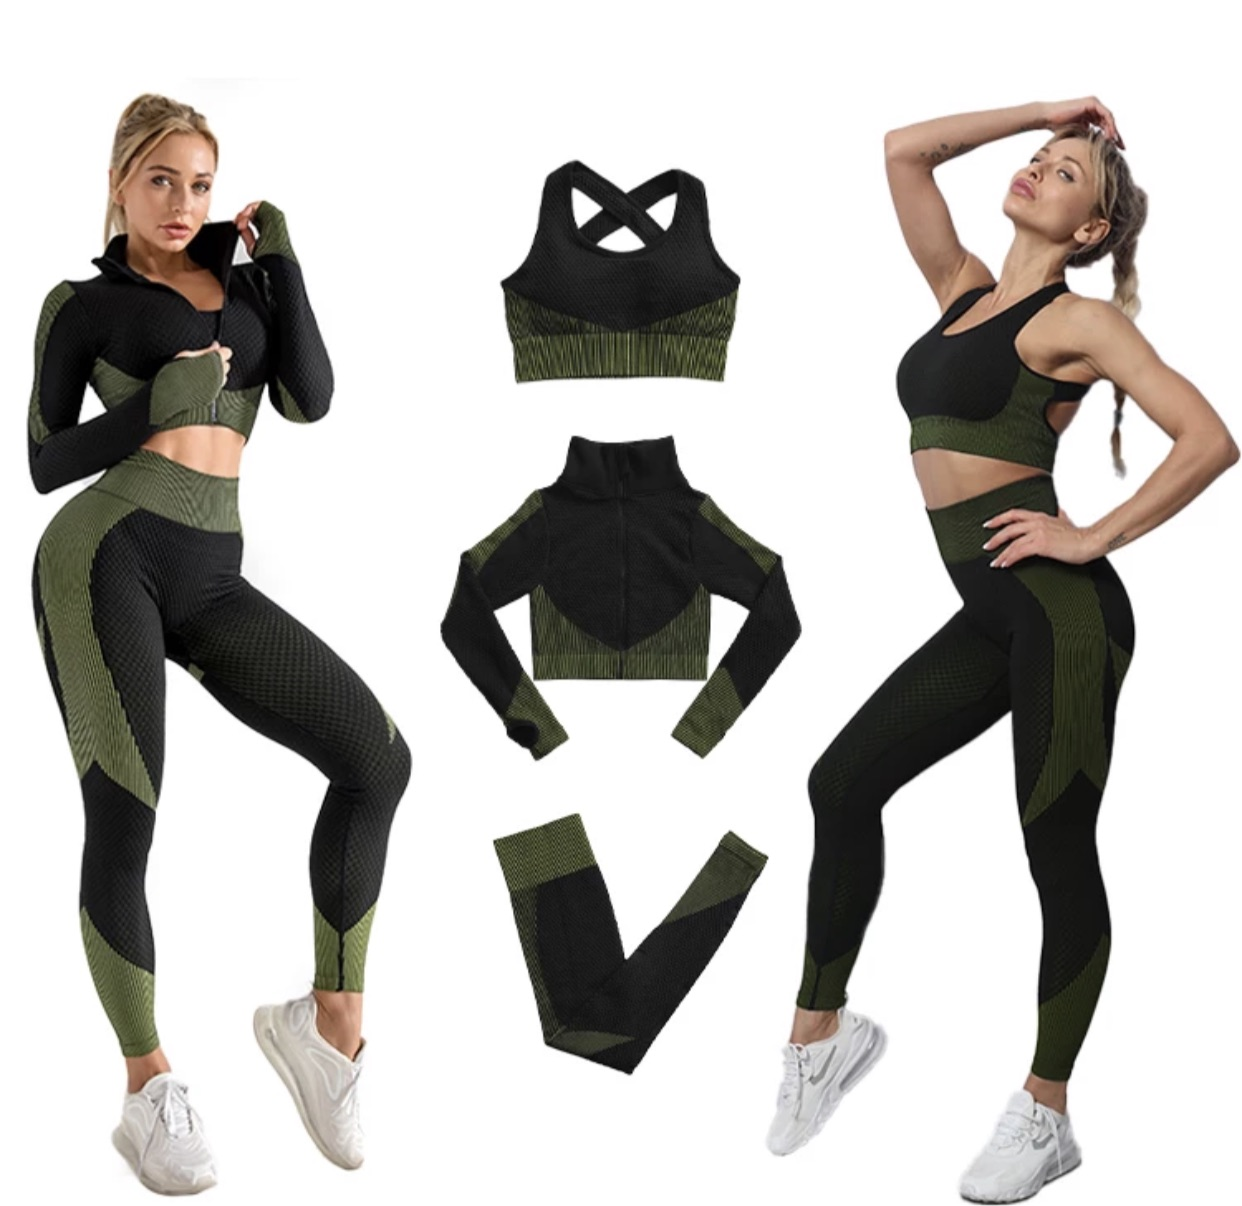  Black Workout Sets for Women: 3 Piece Yoga Outfit